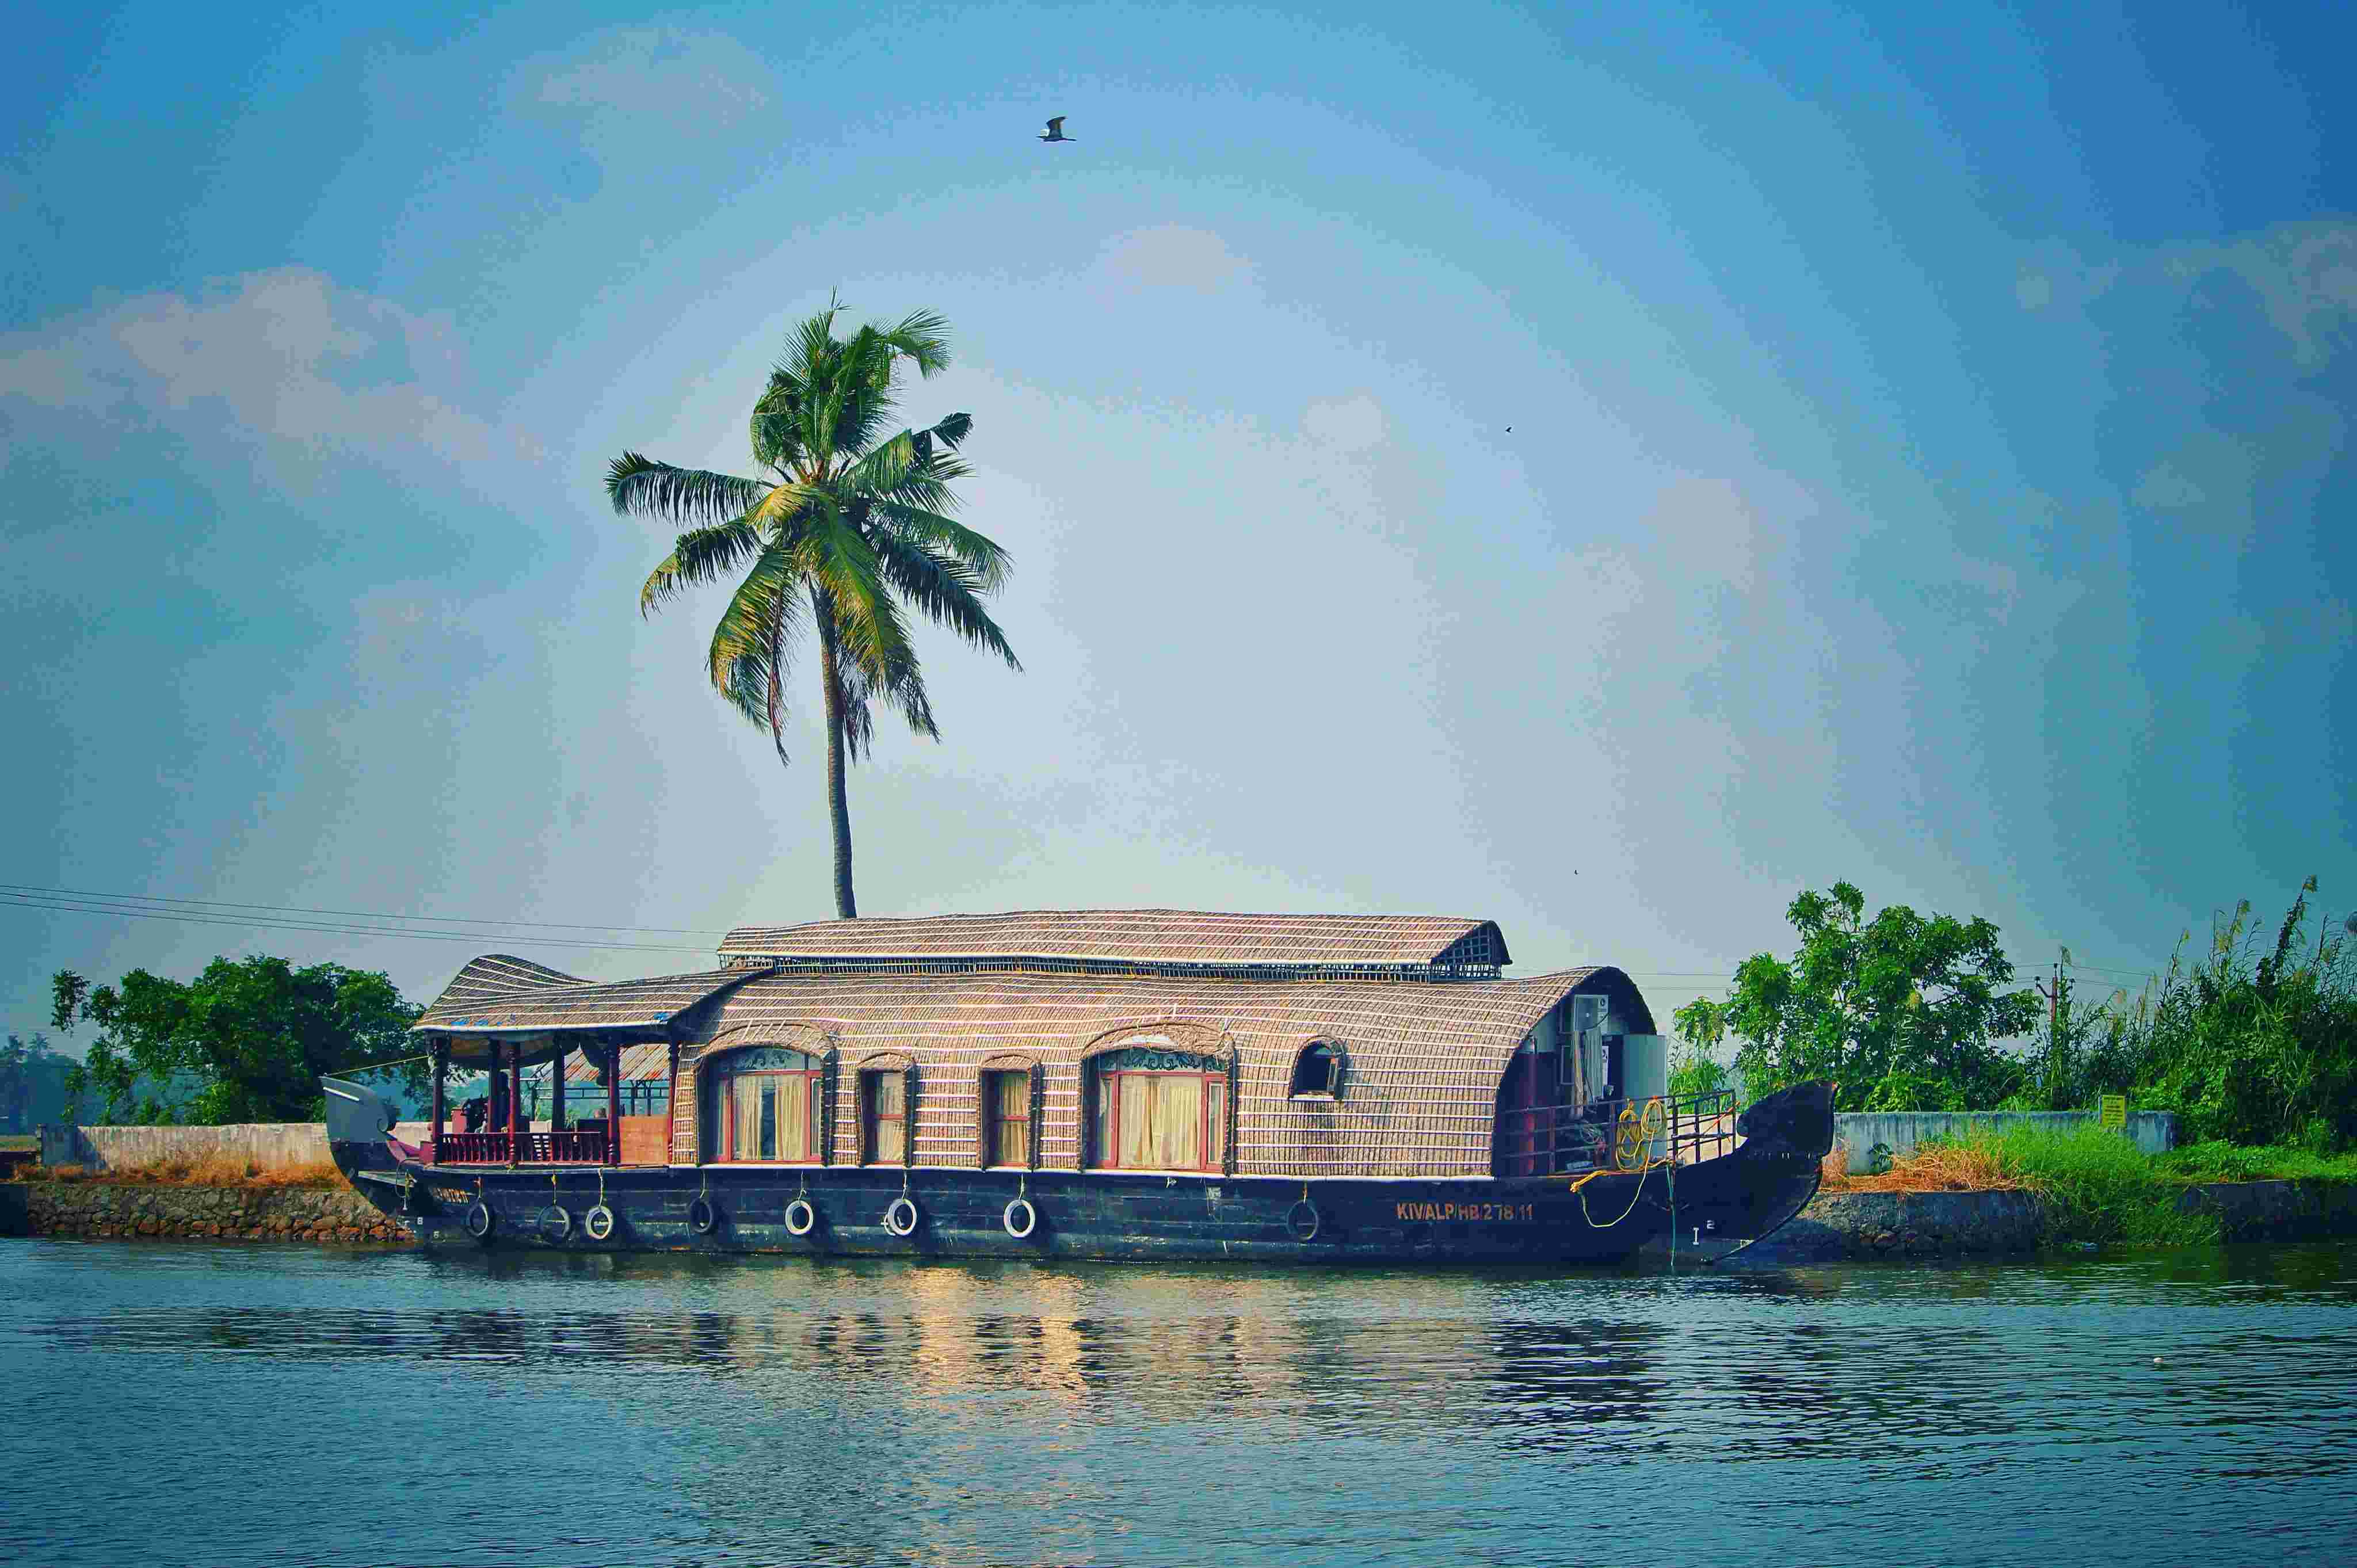 Kerala Escapes Unlock Savings Up to 30 on Tour Packages - Haryana - Gurgaon ID1520576